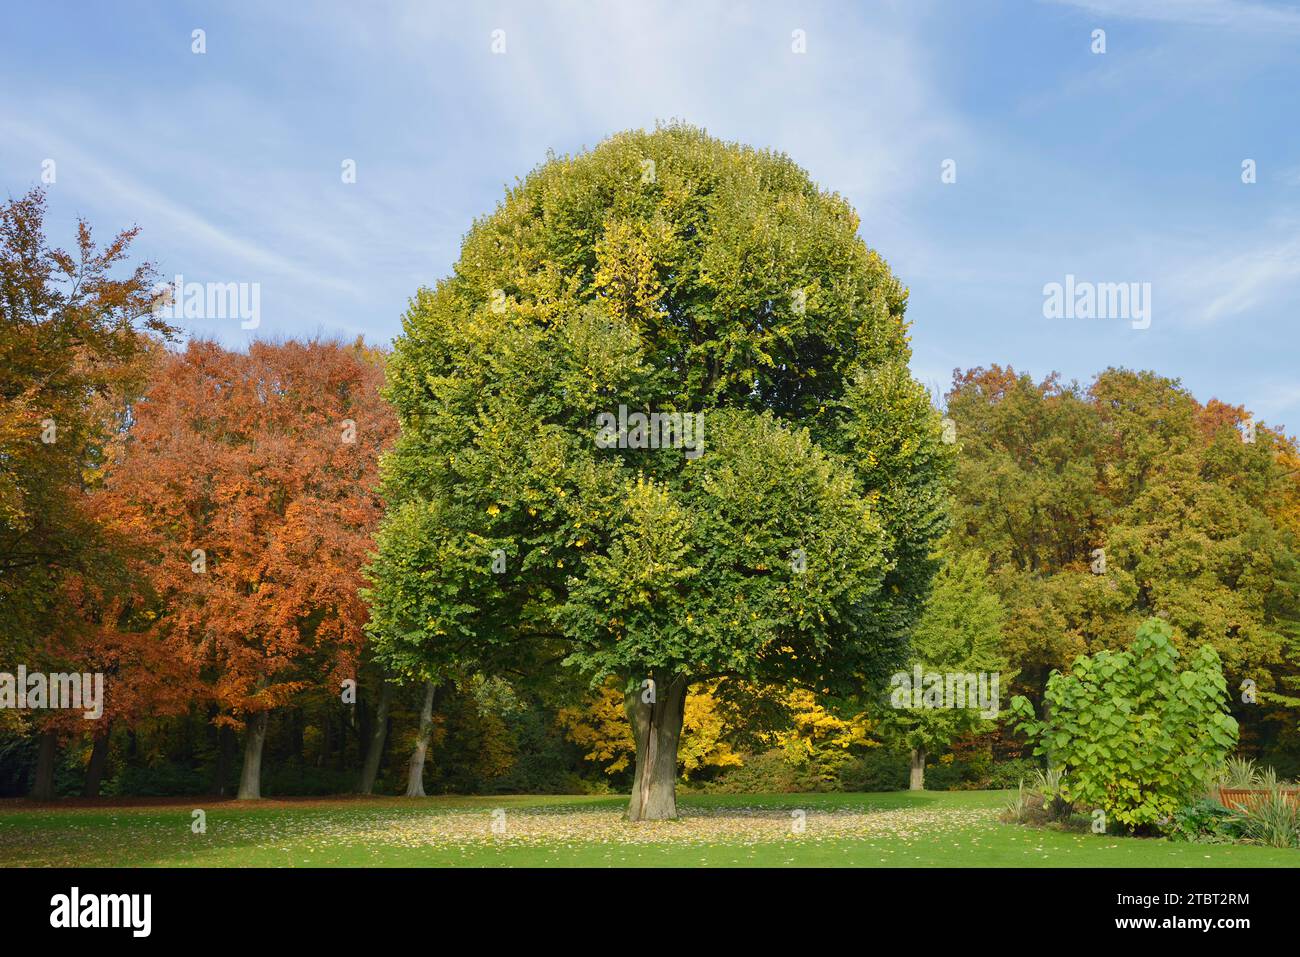 Silver lime (Tilia tomentosa) in fall, North Rhine-Westphalia, Germany Stock Photo